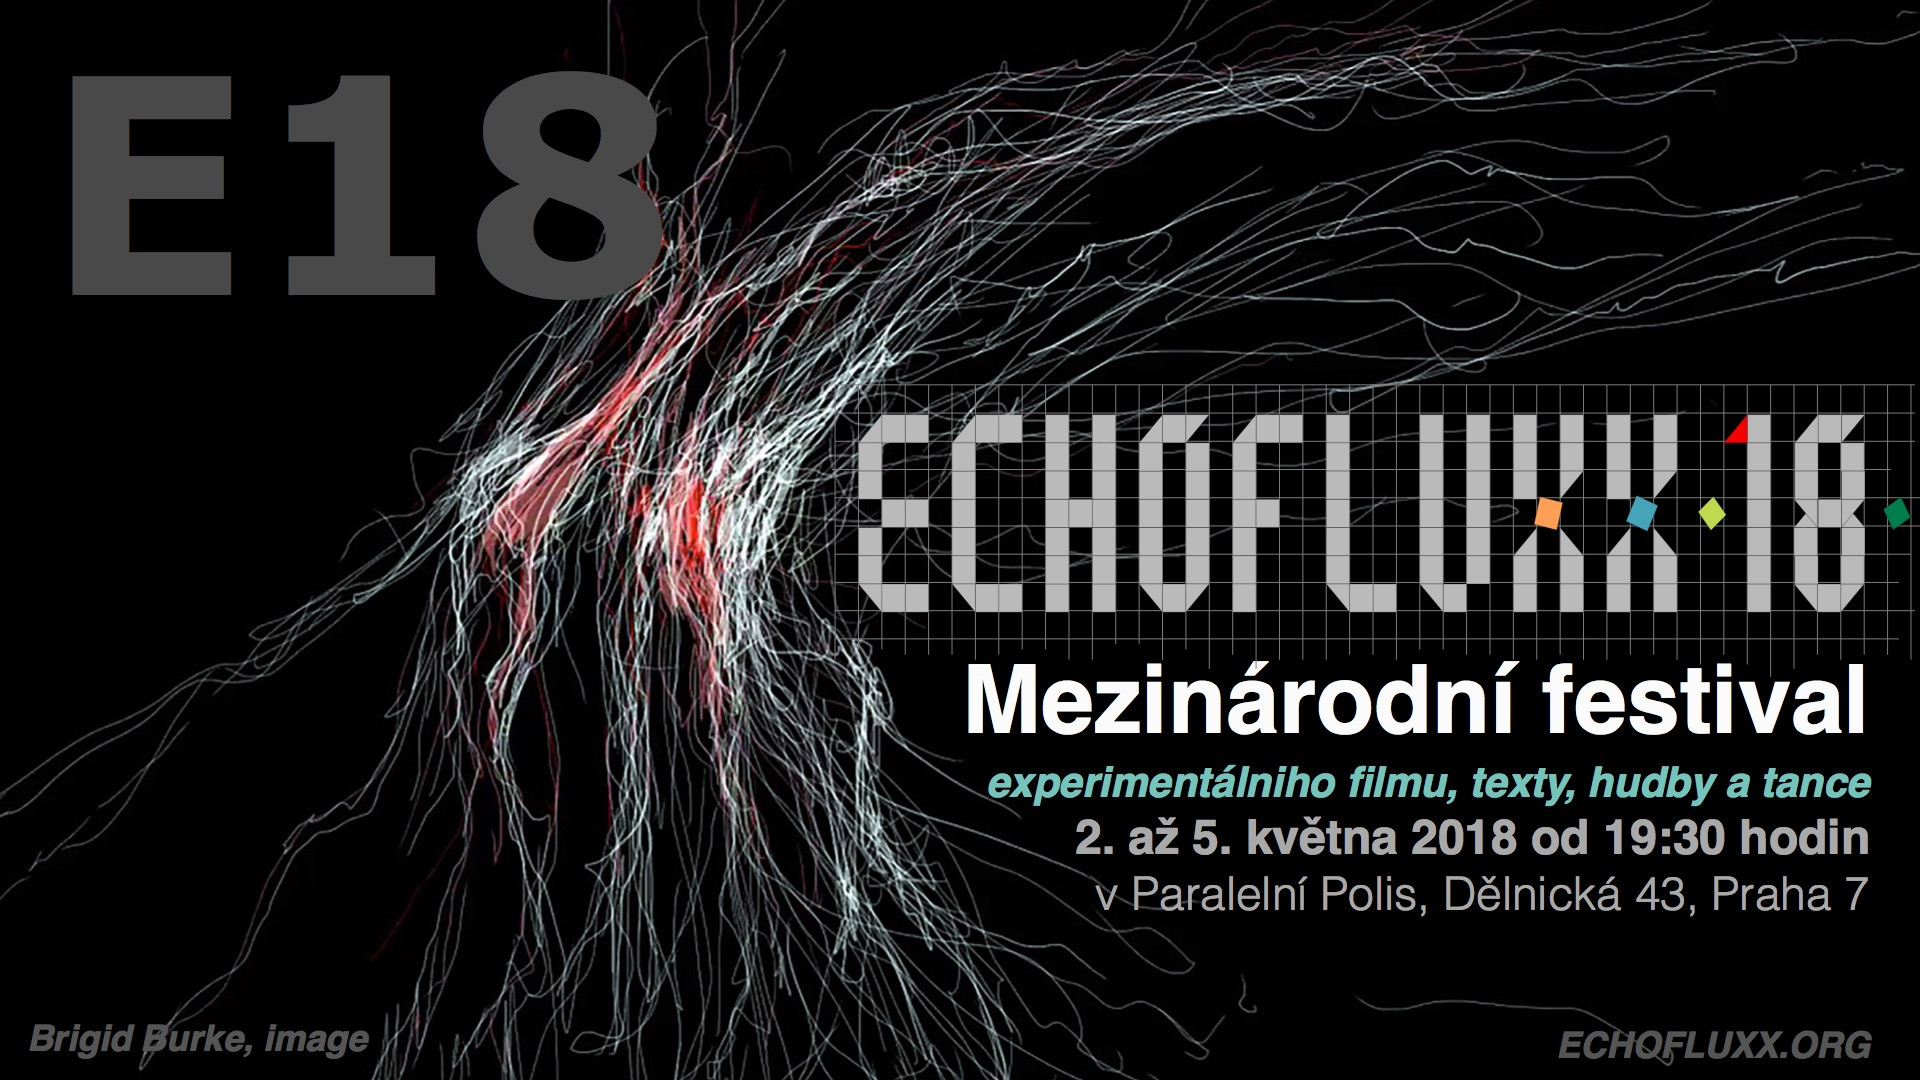 30 attractive Vintage Japanese Vase Markings 2024 free download vintage japanese vase markings of echofluxx 18 festival of new media art and music paralelni polis regarding echofluxx 18 festival of new media art and music paralelni polis prague may 2 5 2